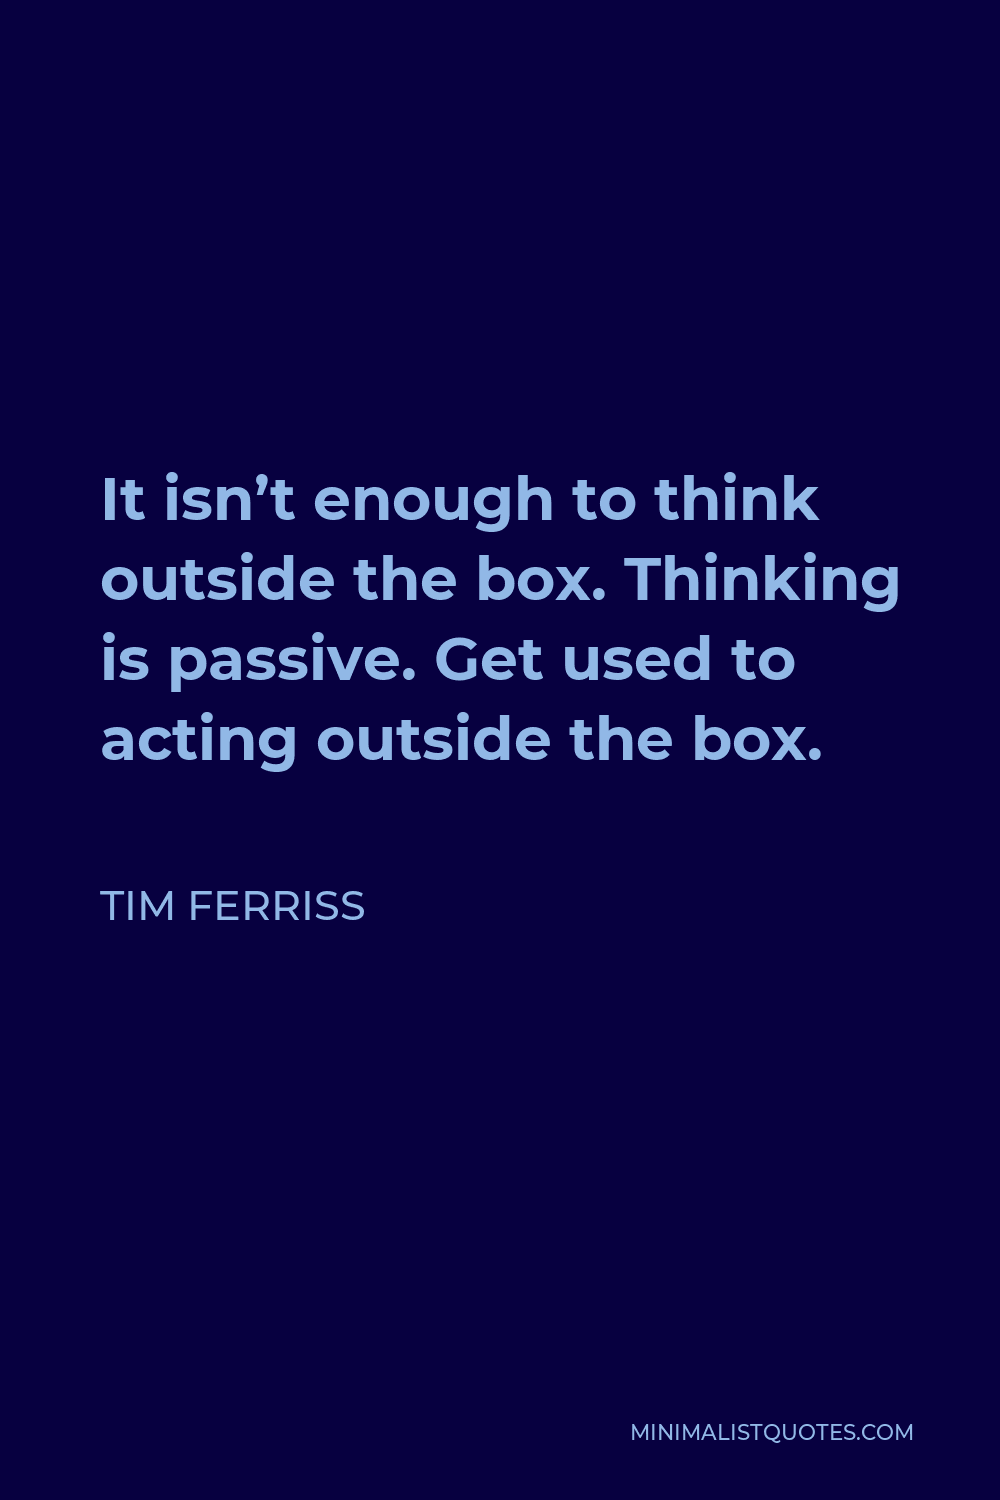 Tim Ferriss Quote - It isn’t enough to think outside the box. Thinking is passive. Get used to acting outside the box.